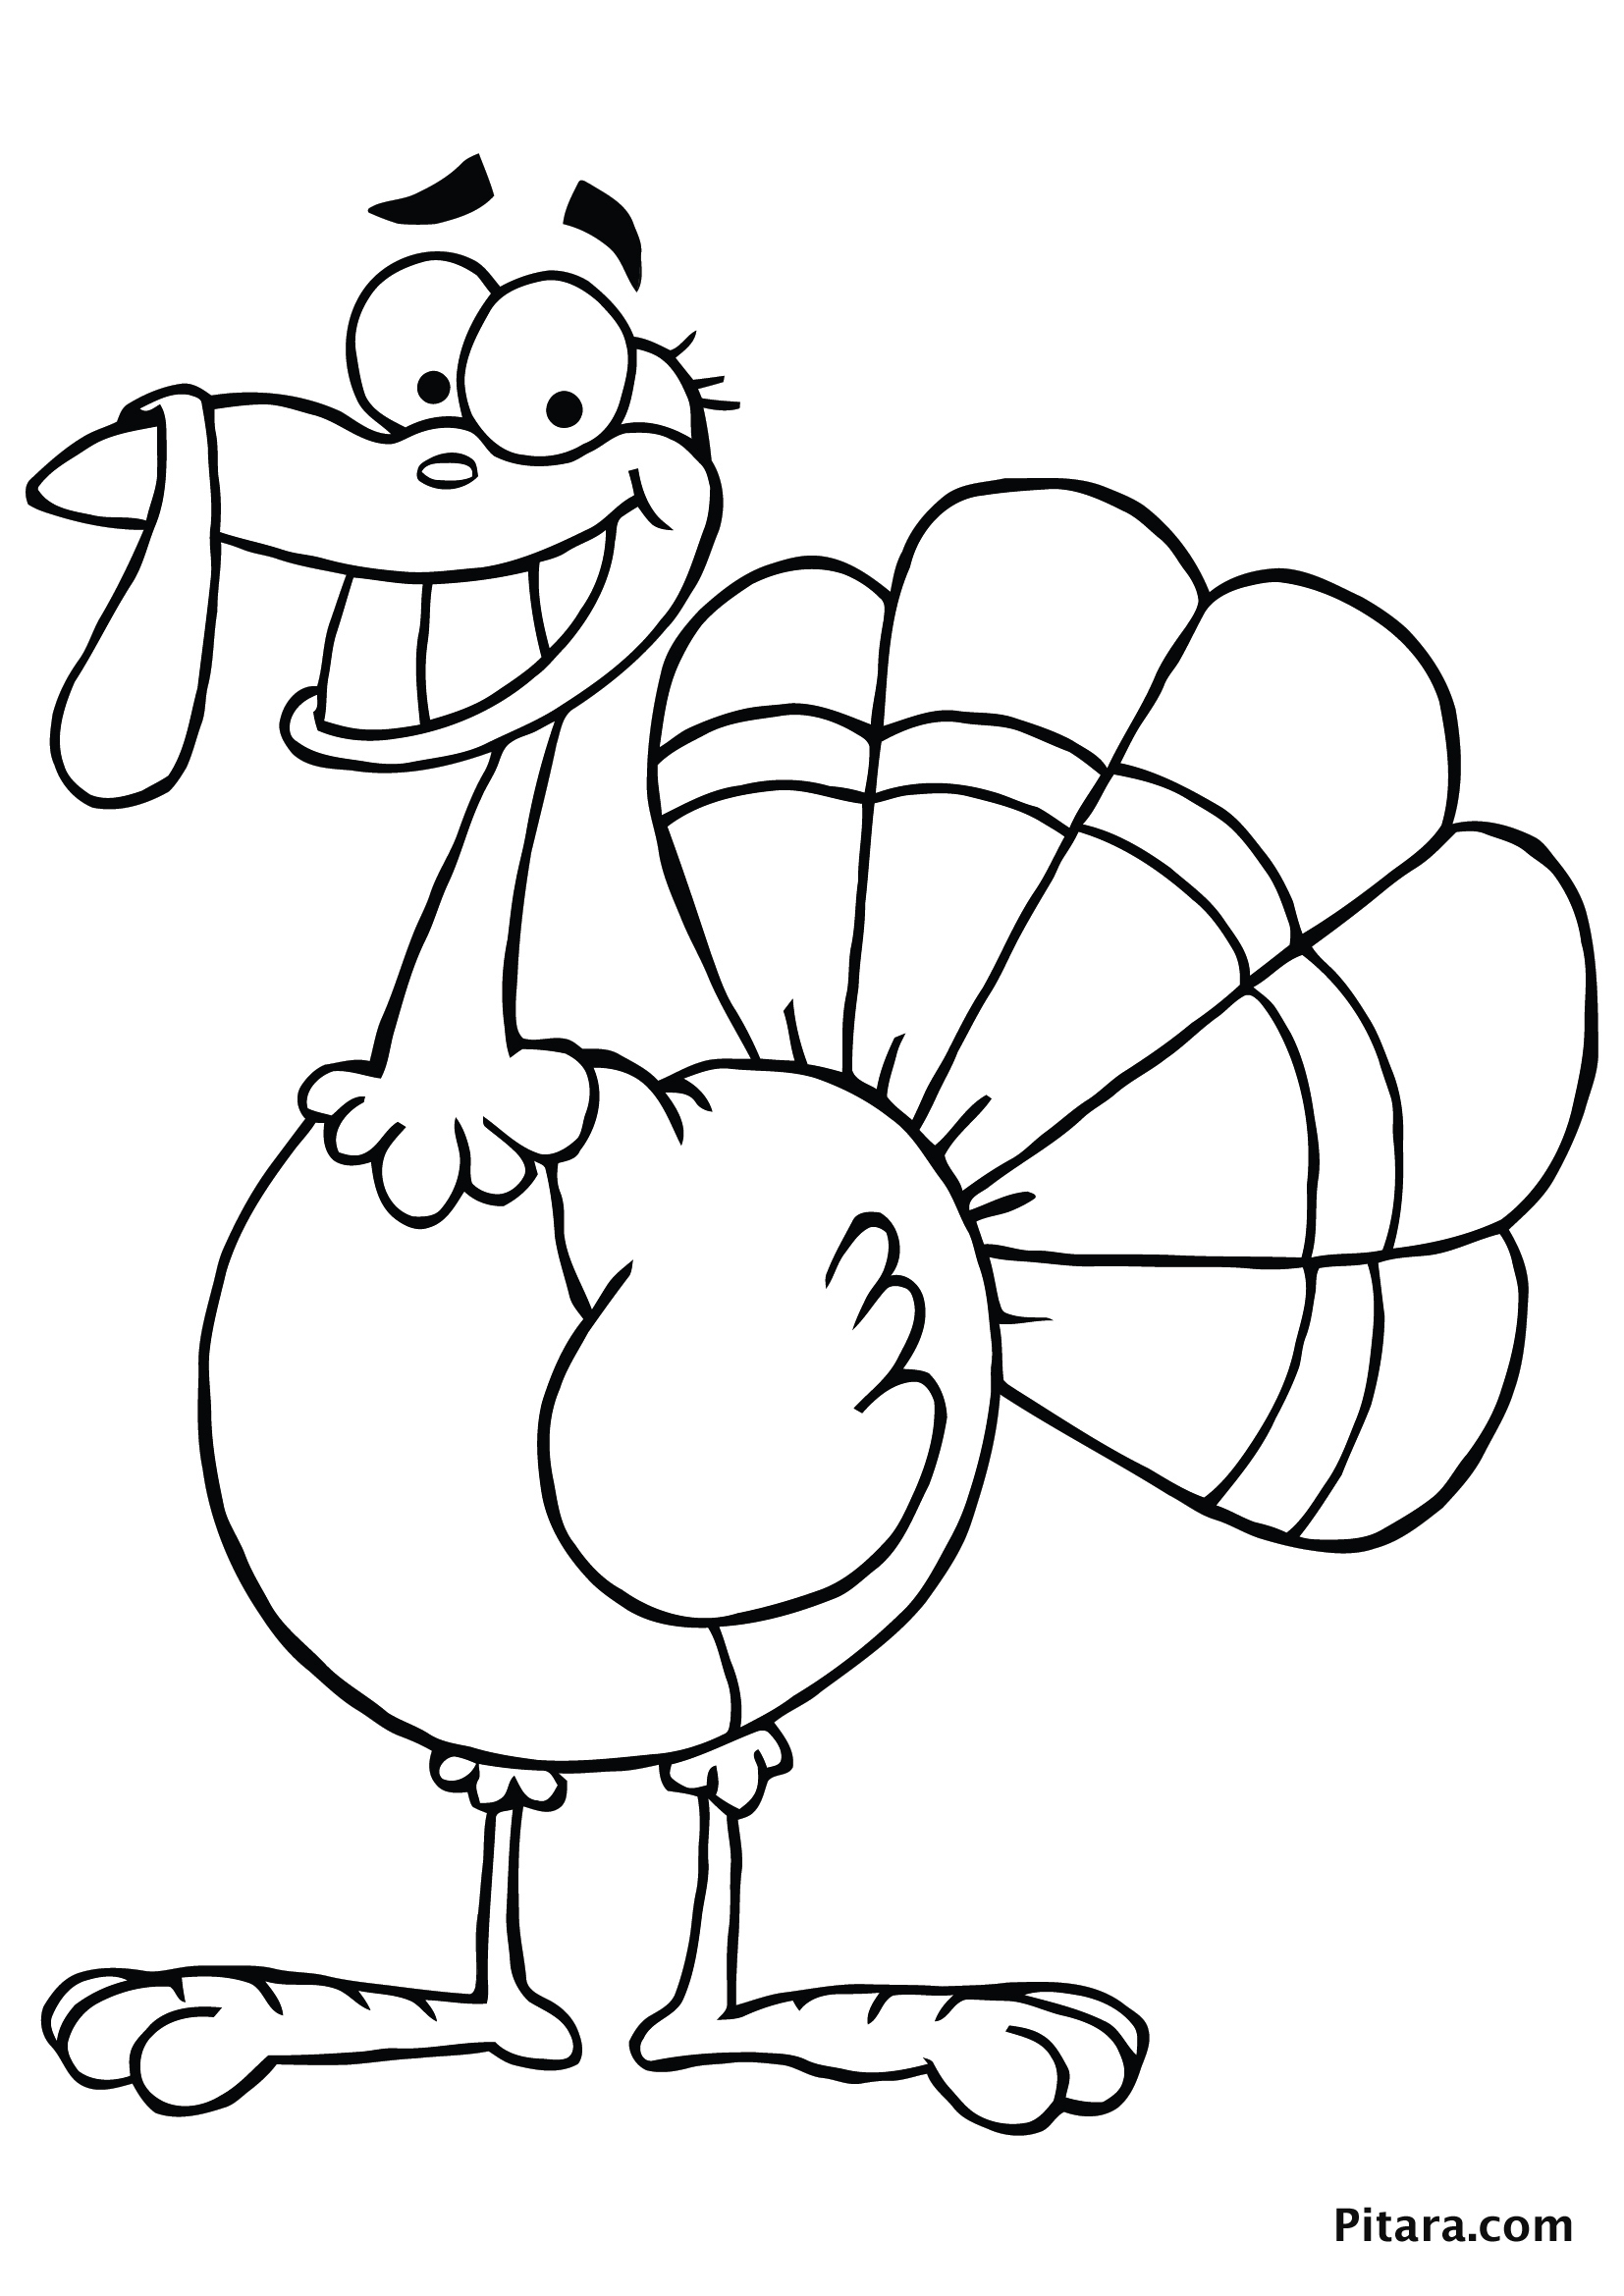 Turkey Coloring Pages for Kids | Pitara Kids Network